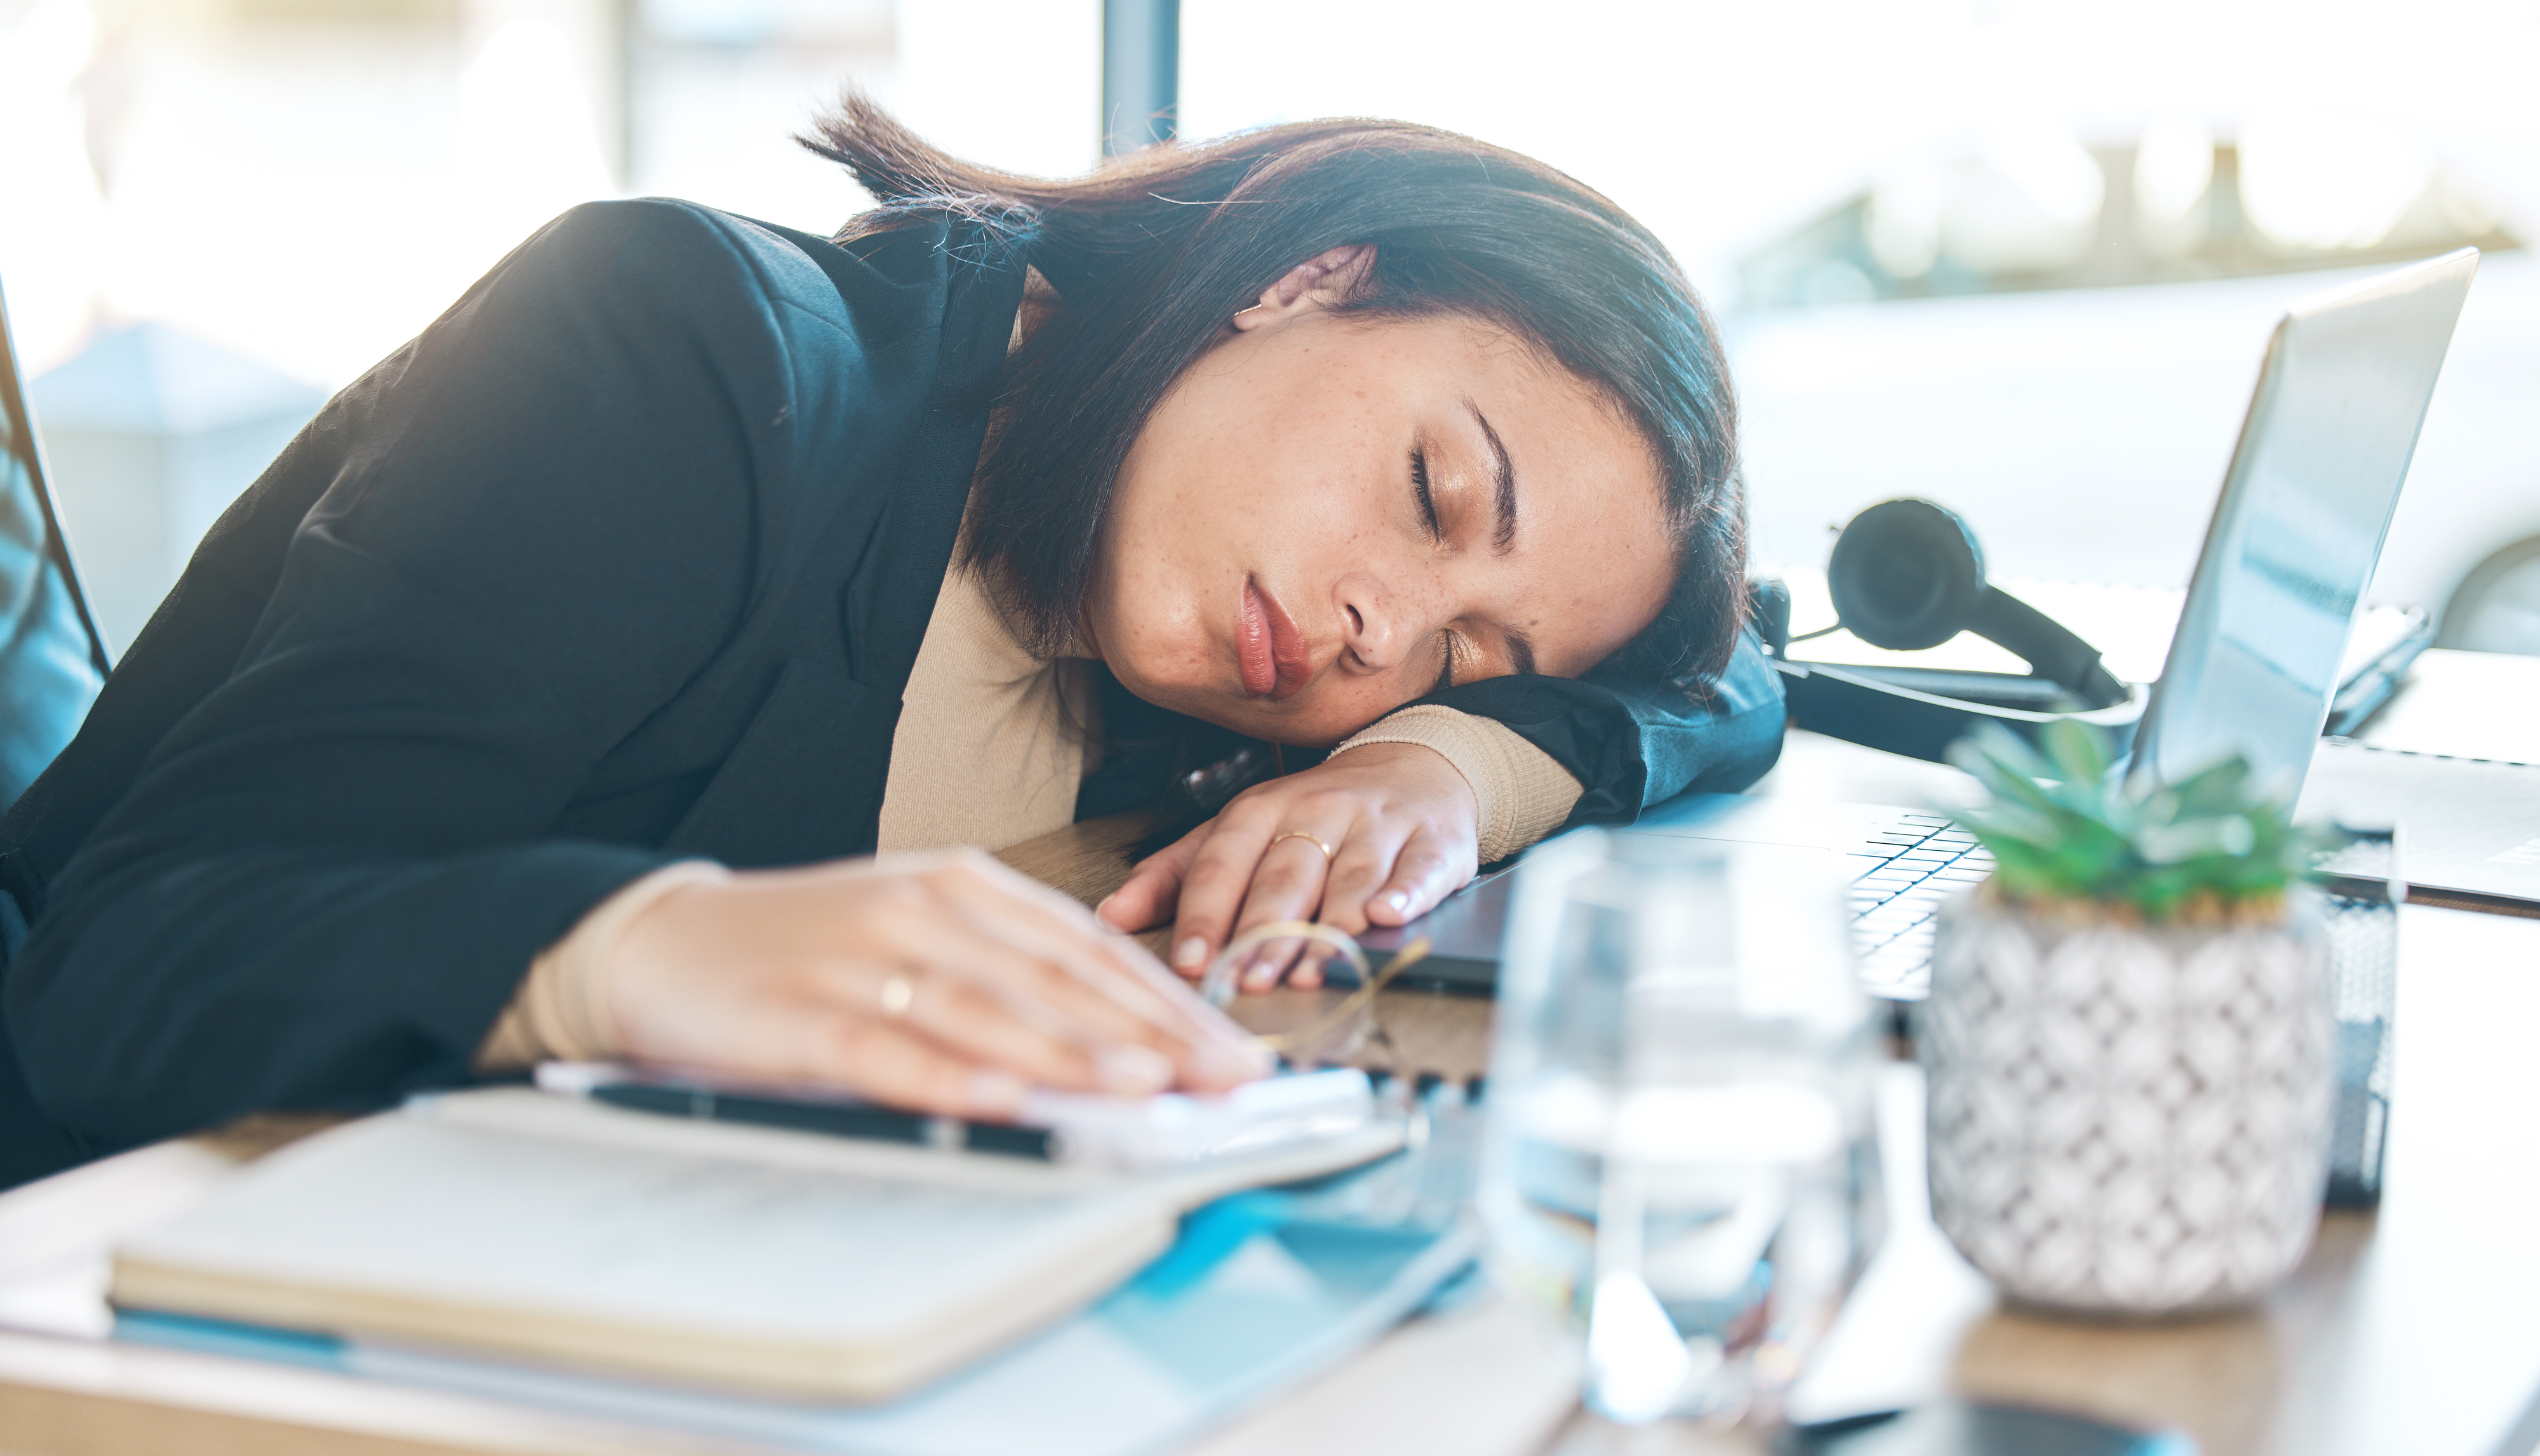 Woman asleep at desk with laptop, paperwork, and a plant, suggesting work fatigue or burnout